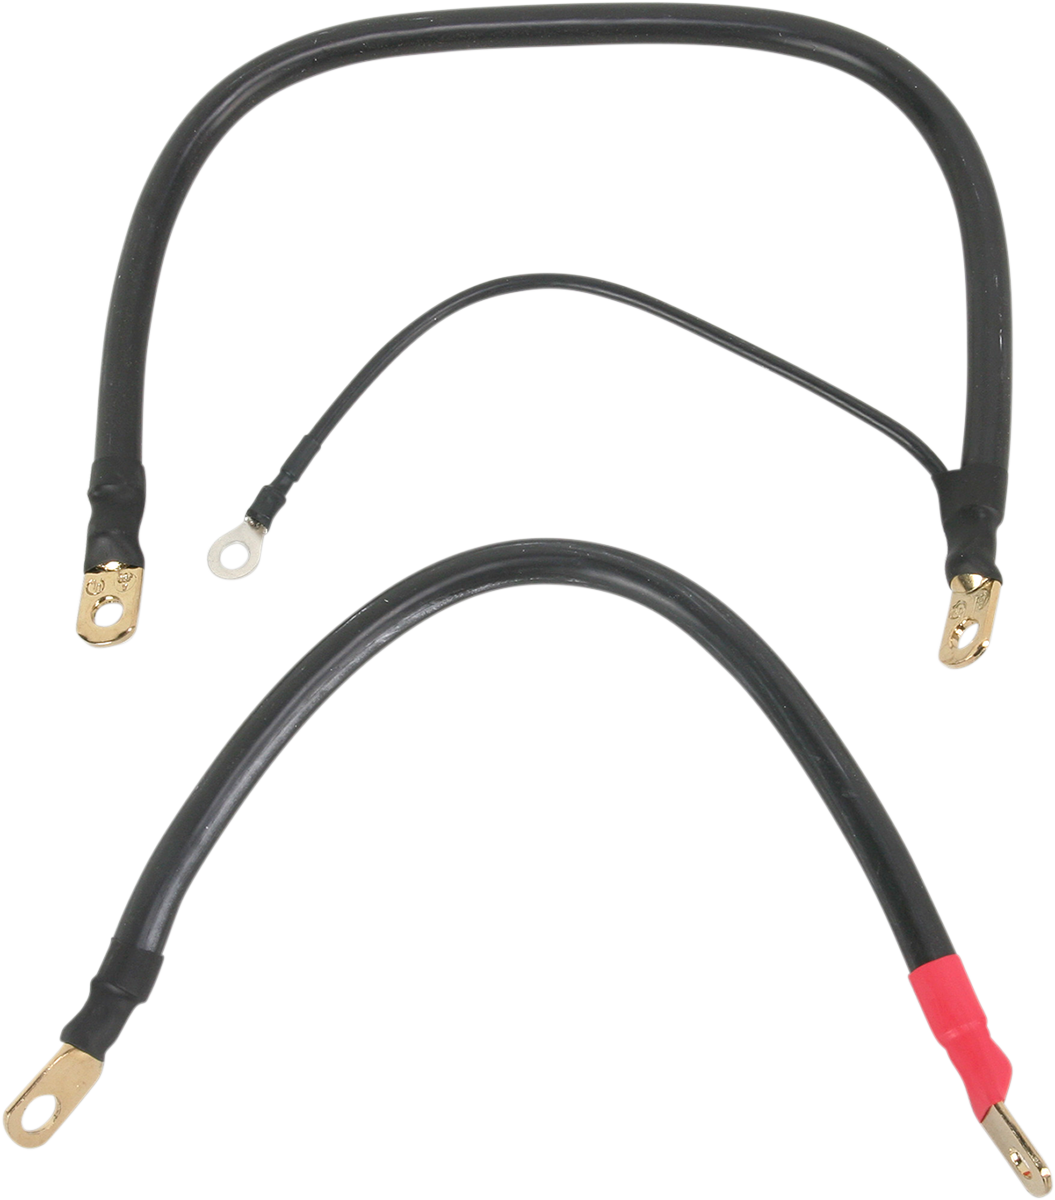 2113-0206 - TERRY COMPONENTS Battery Cables - '07 FLT 22040